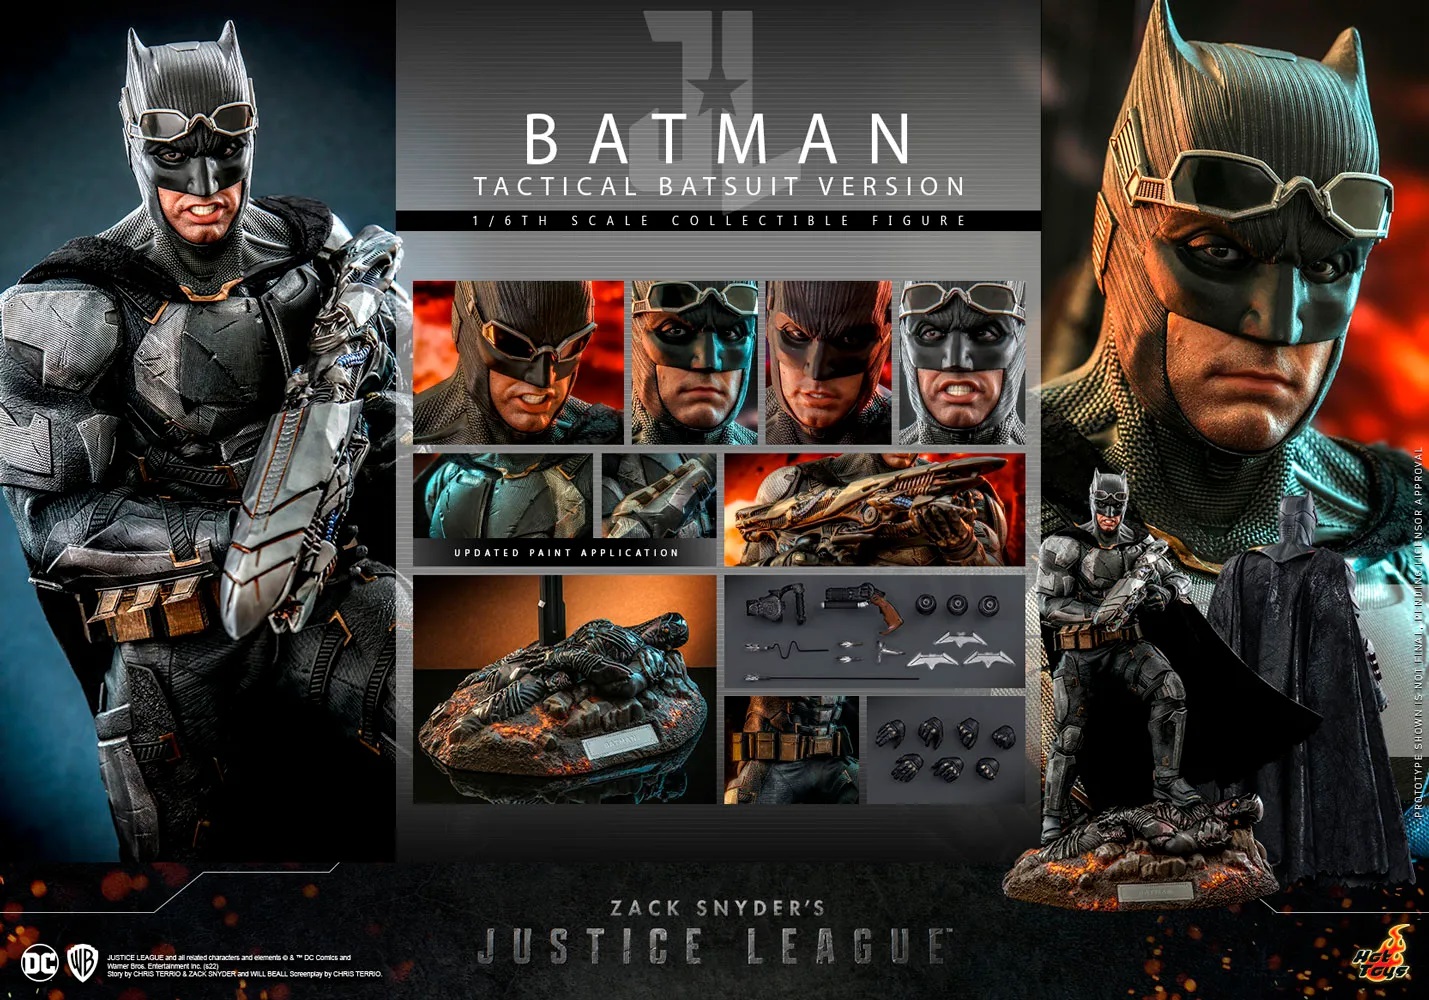 Stunning Movie Tactical BatSuit Figure From Sideshow - Dark Knight News